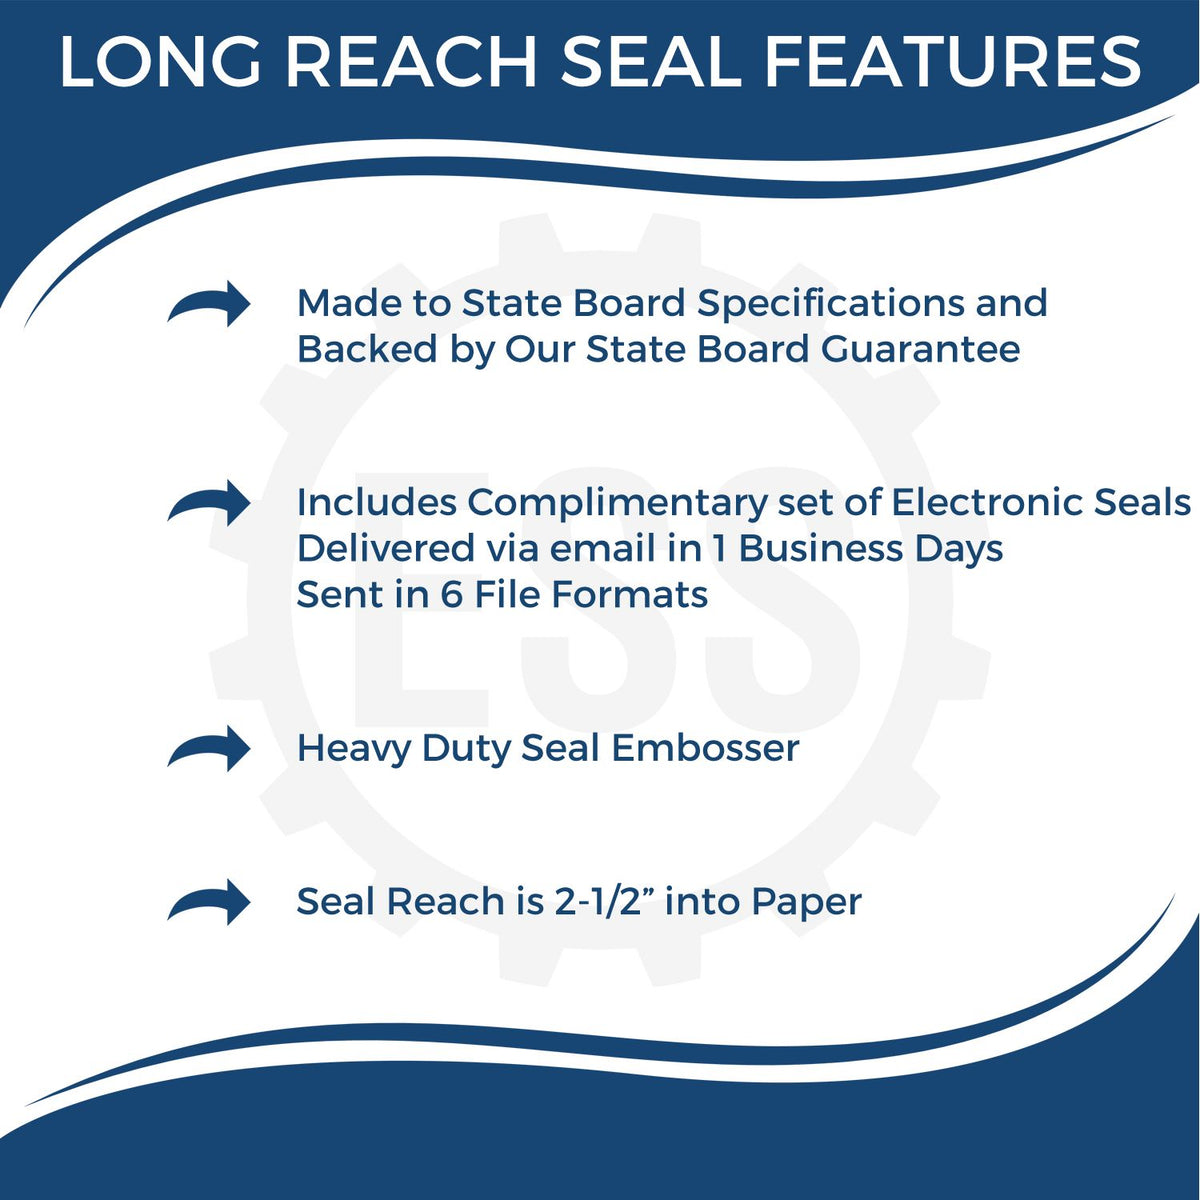 A picture of an infographic highlighting the selling points for the Long Reach Montana Land Surveyor Seal